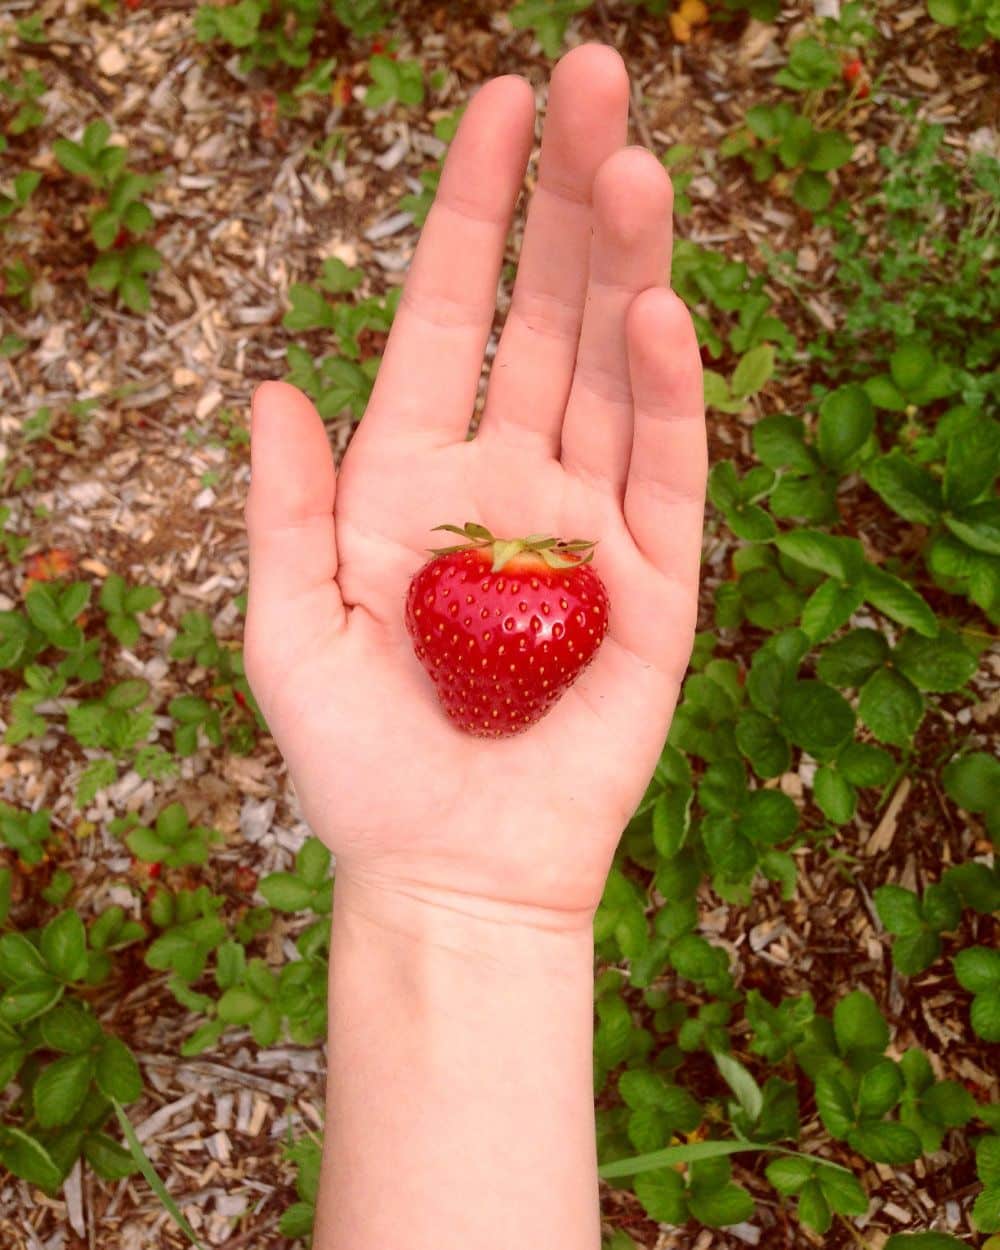 A hand holds a single, perfect home grown Goldberry strawberry.